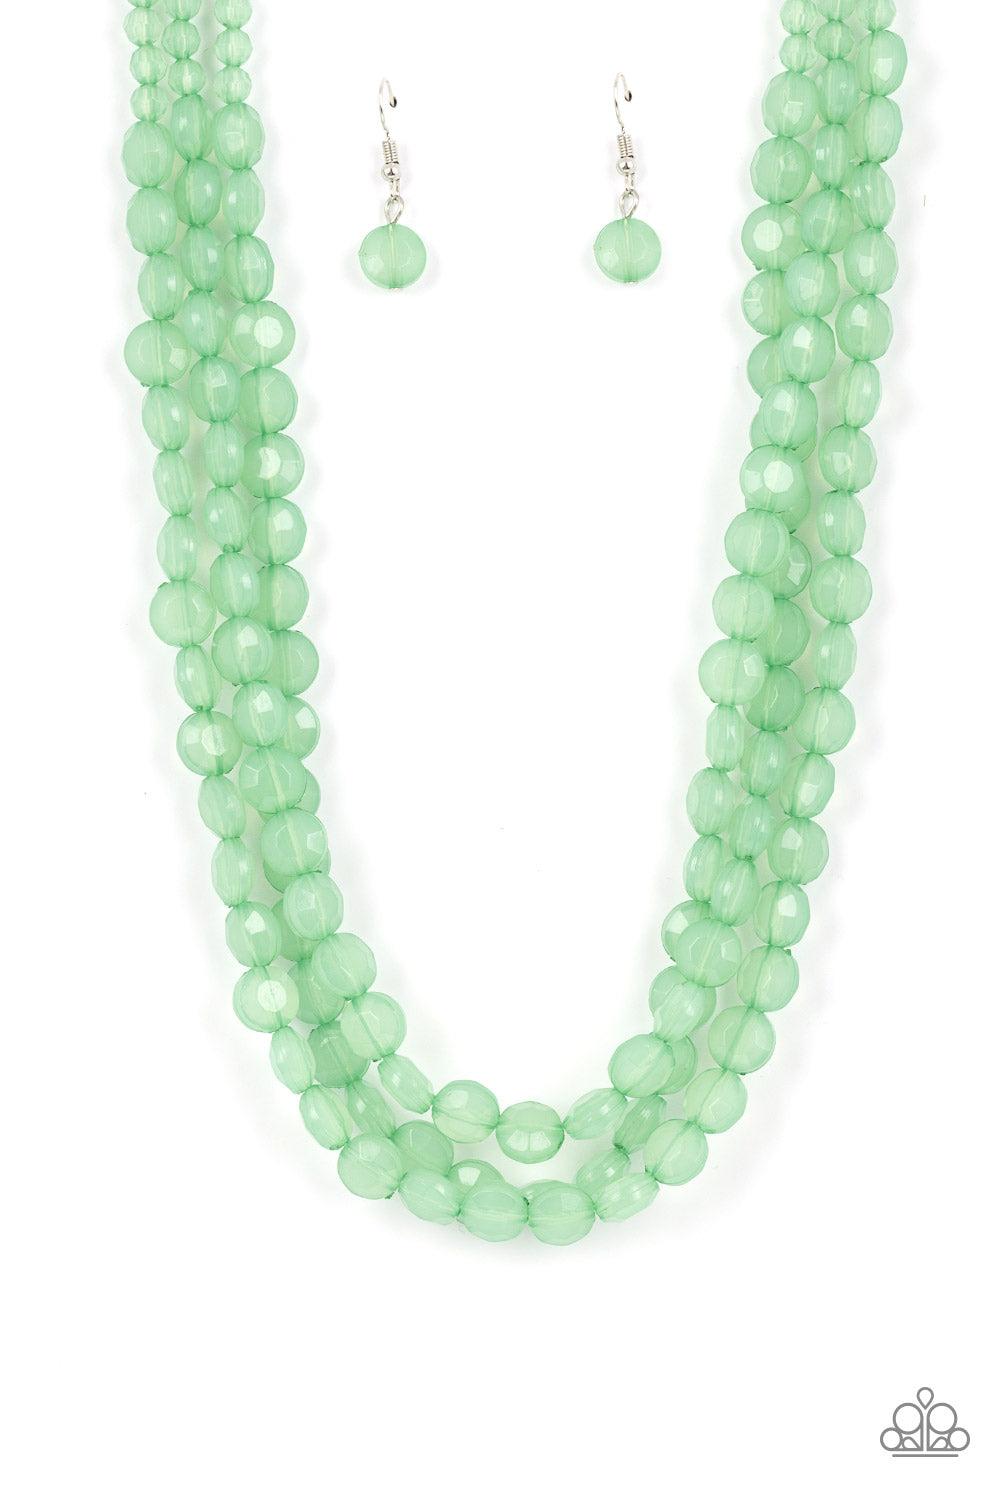 Boundless Bliss - Green Opaque Bead Necklaces featuring faceted gem-like cuts, opaque Basil crystal-like beads are threaded along layers of thread below the collar for a dreamy pop of color. Features an adjustable clasp closure.  Sold as one individual necklace. Includes one pair of matching earrings.